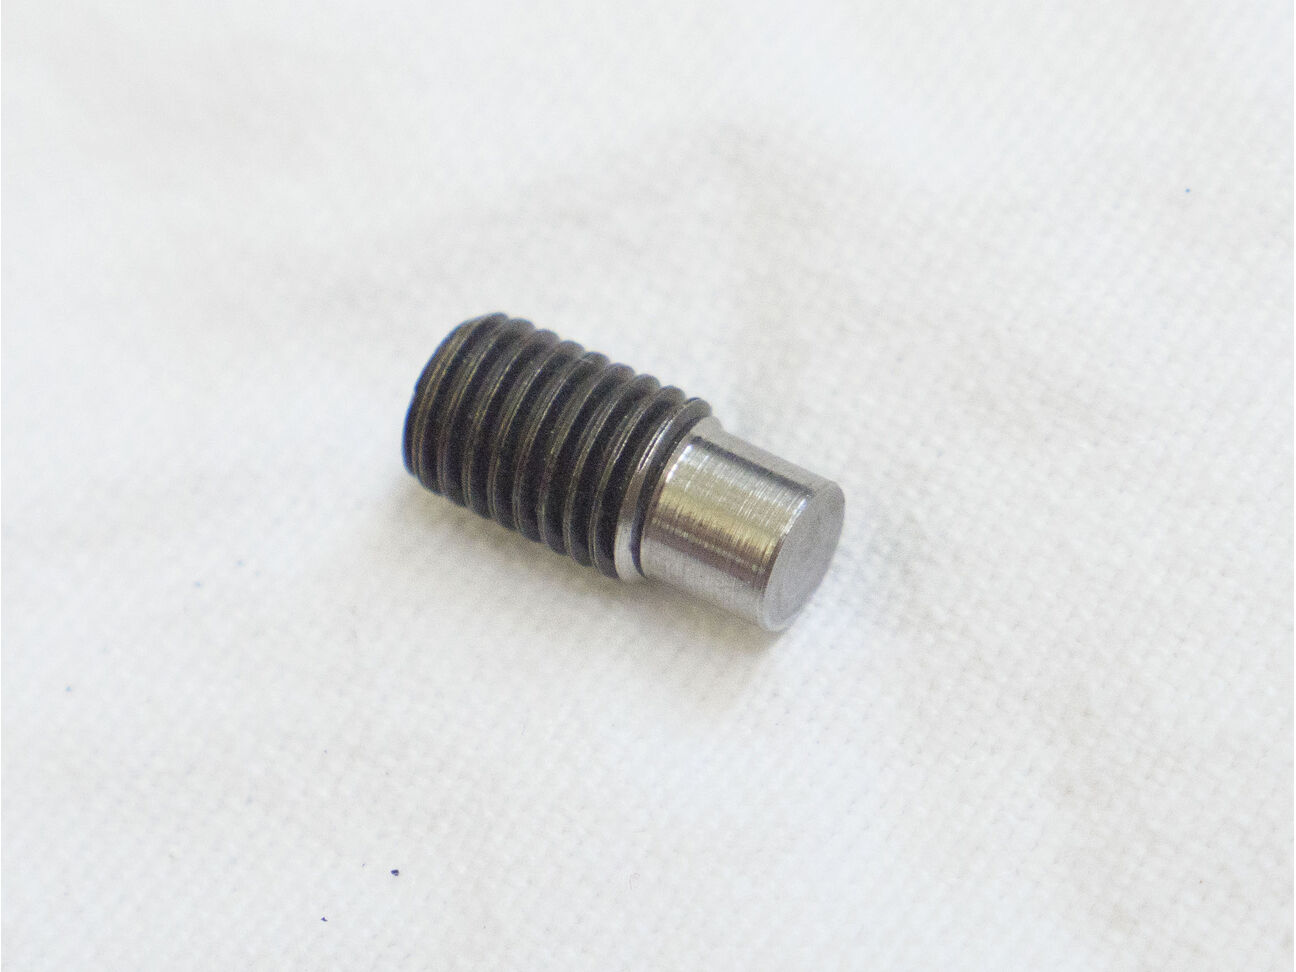 Autococker hammer lug in ¼ – 28 threads, fits newer style autococker hammers. New